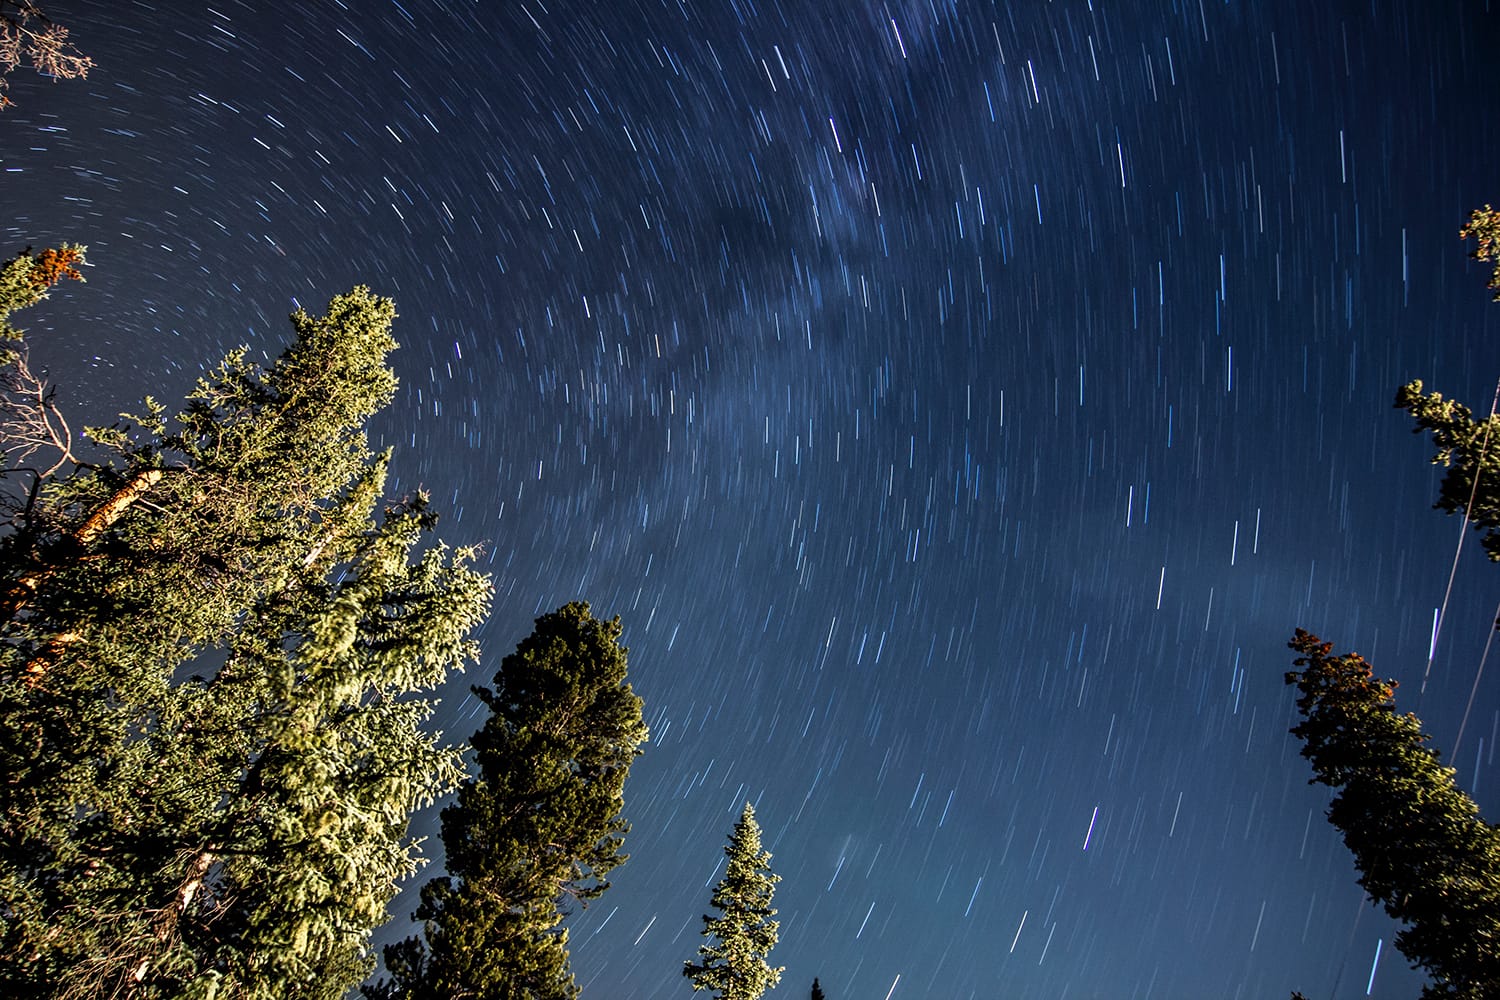 How to Shoot Incredible Star Trail Photographs